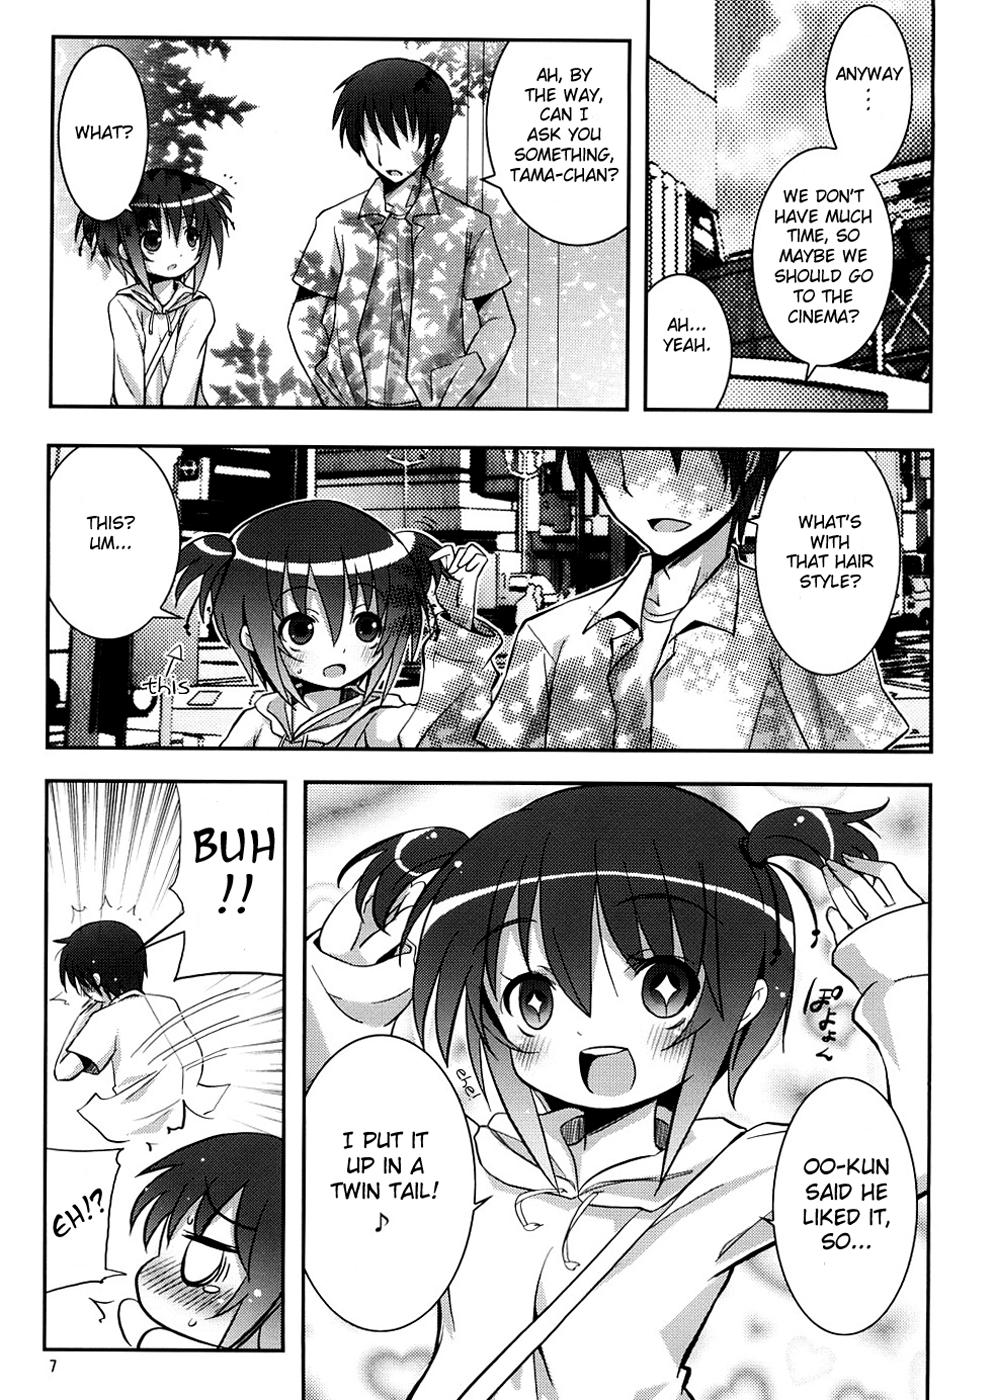 Dildos Tama-chan to Date. - Bamboo blade Chat - Page 6